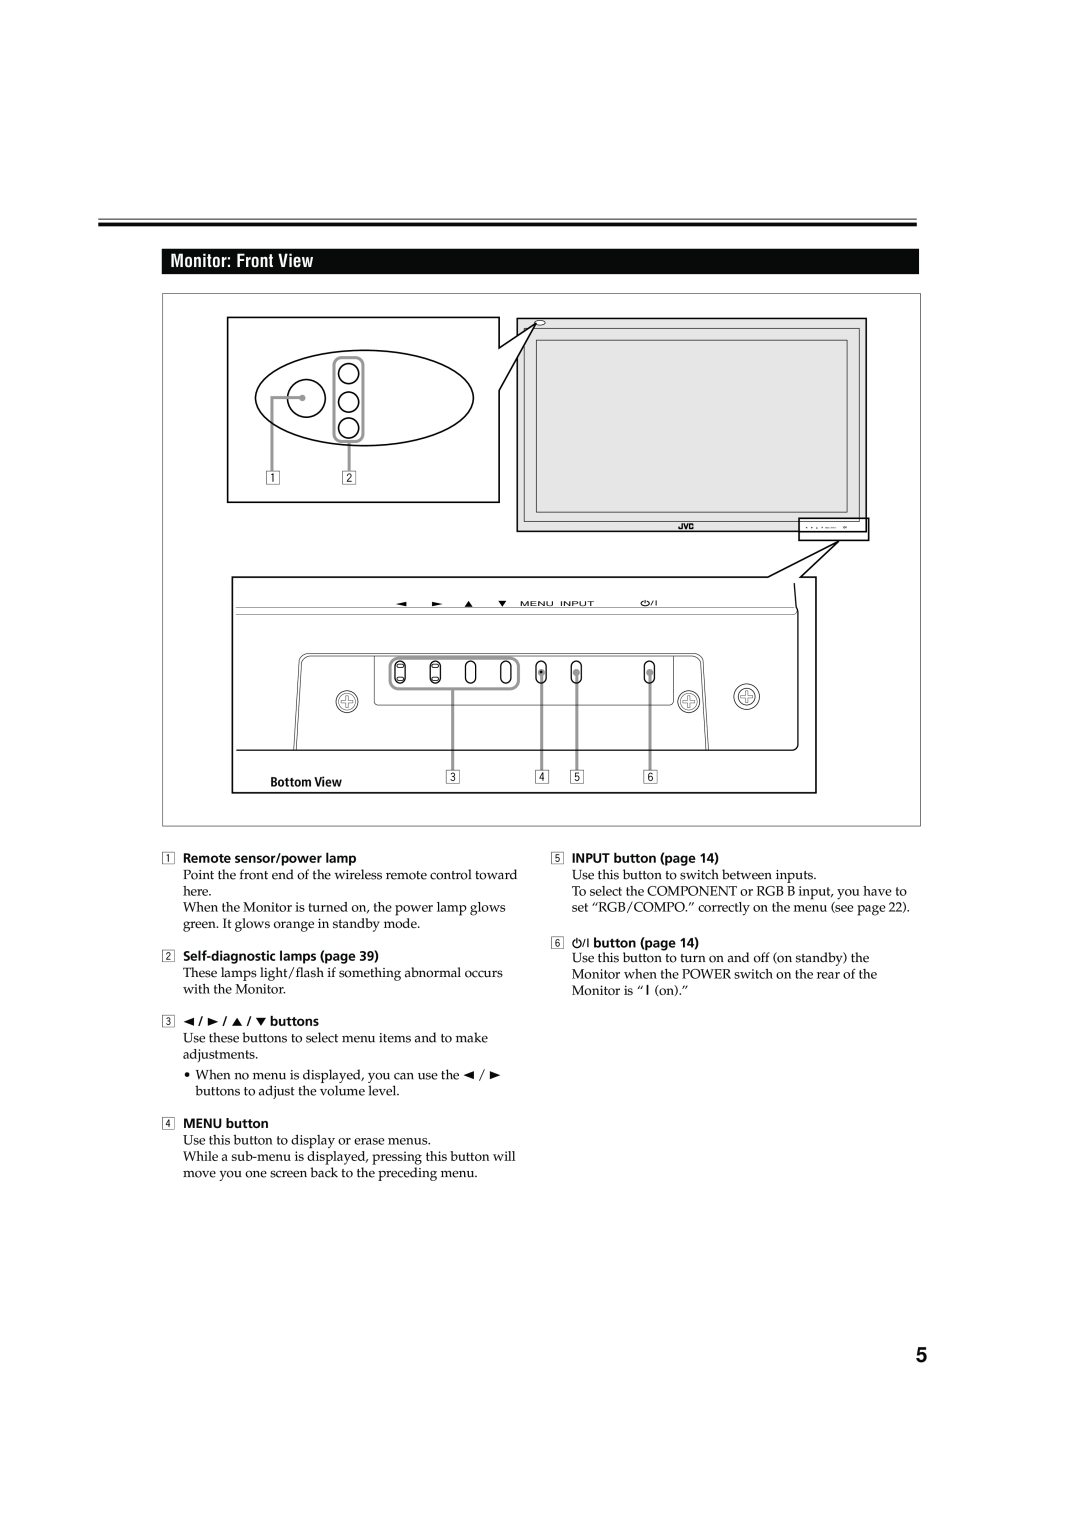 JVC LCT1616-001A manual Monitor Front View, Remote sensor/power lamp, Self-diagnostic lamps page, 3 2 / 3 / 5 / ∞ buttons 